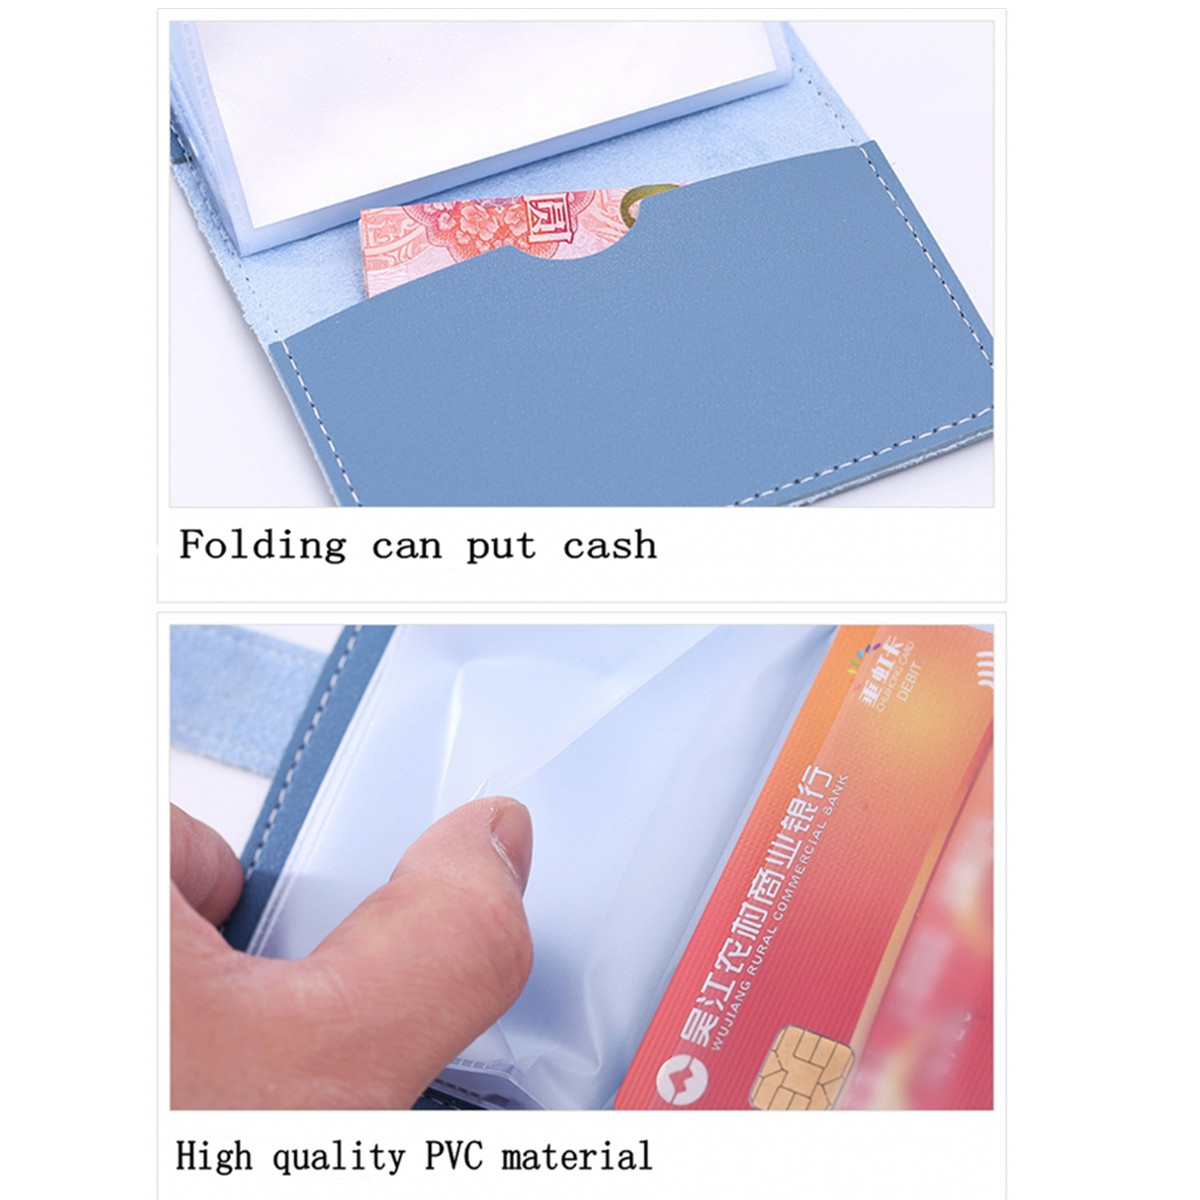 26-Card-Slots-Portable-Leather-Wallet-Anti-theft-Brush-Shield-NFCRFID-Card-Holder-1644277-7